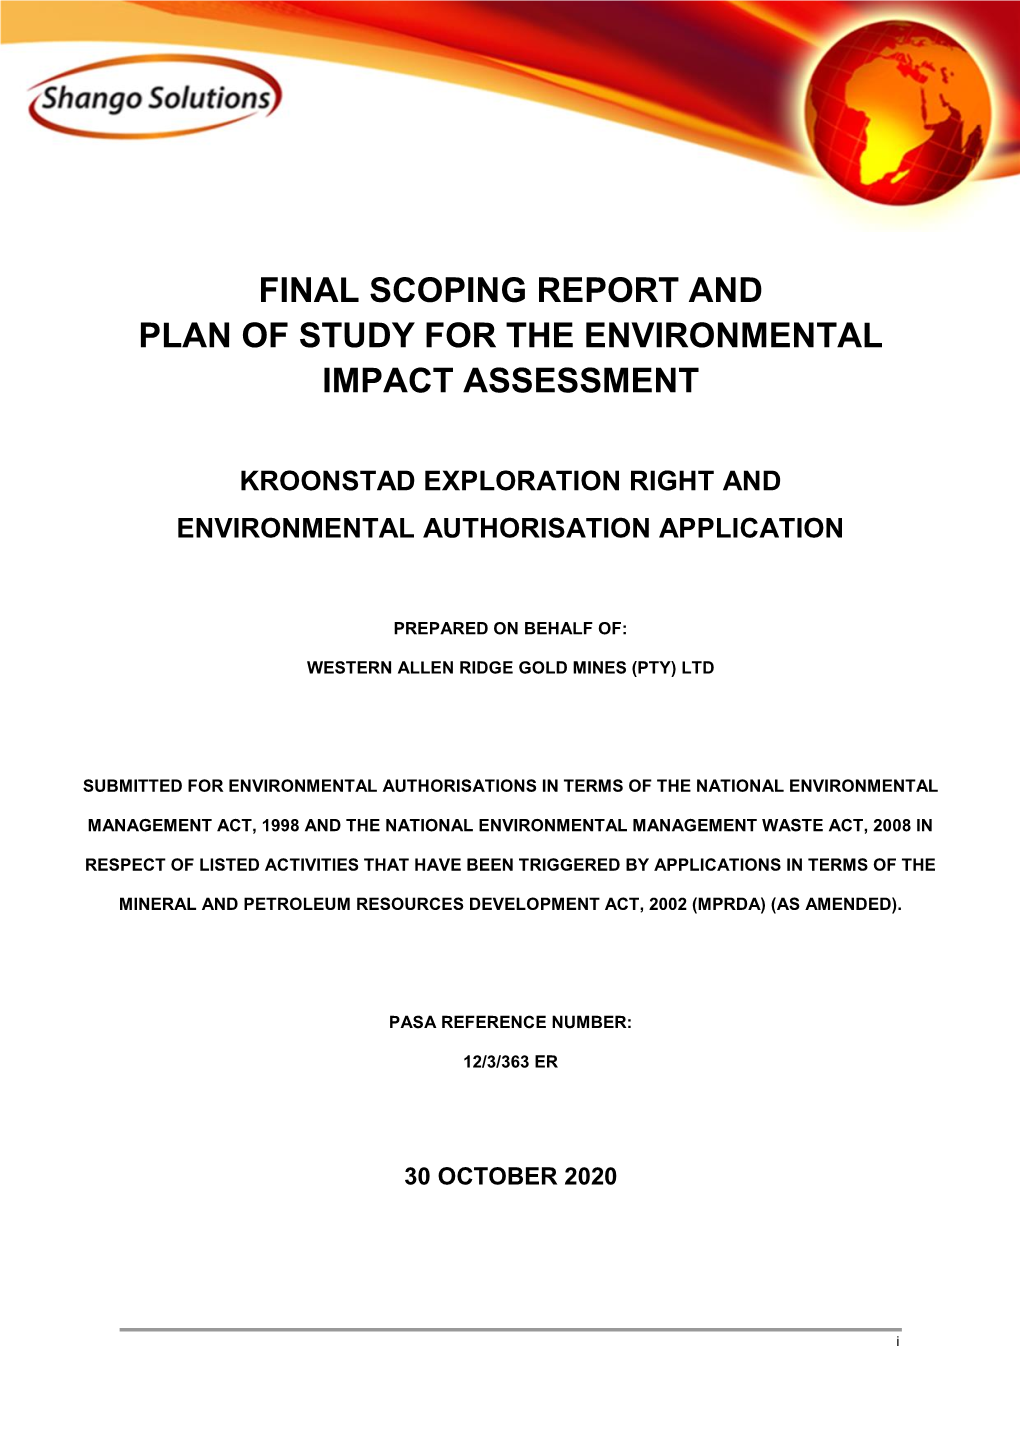 Final Scoping Report and Plan of Study for the Environmental Impact Assessment